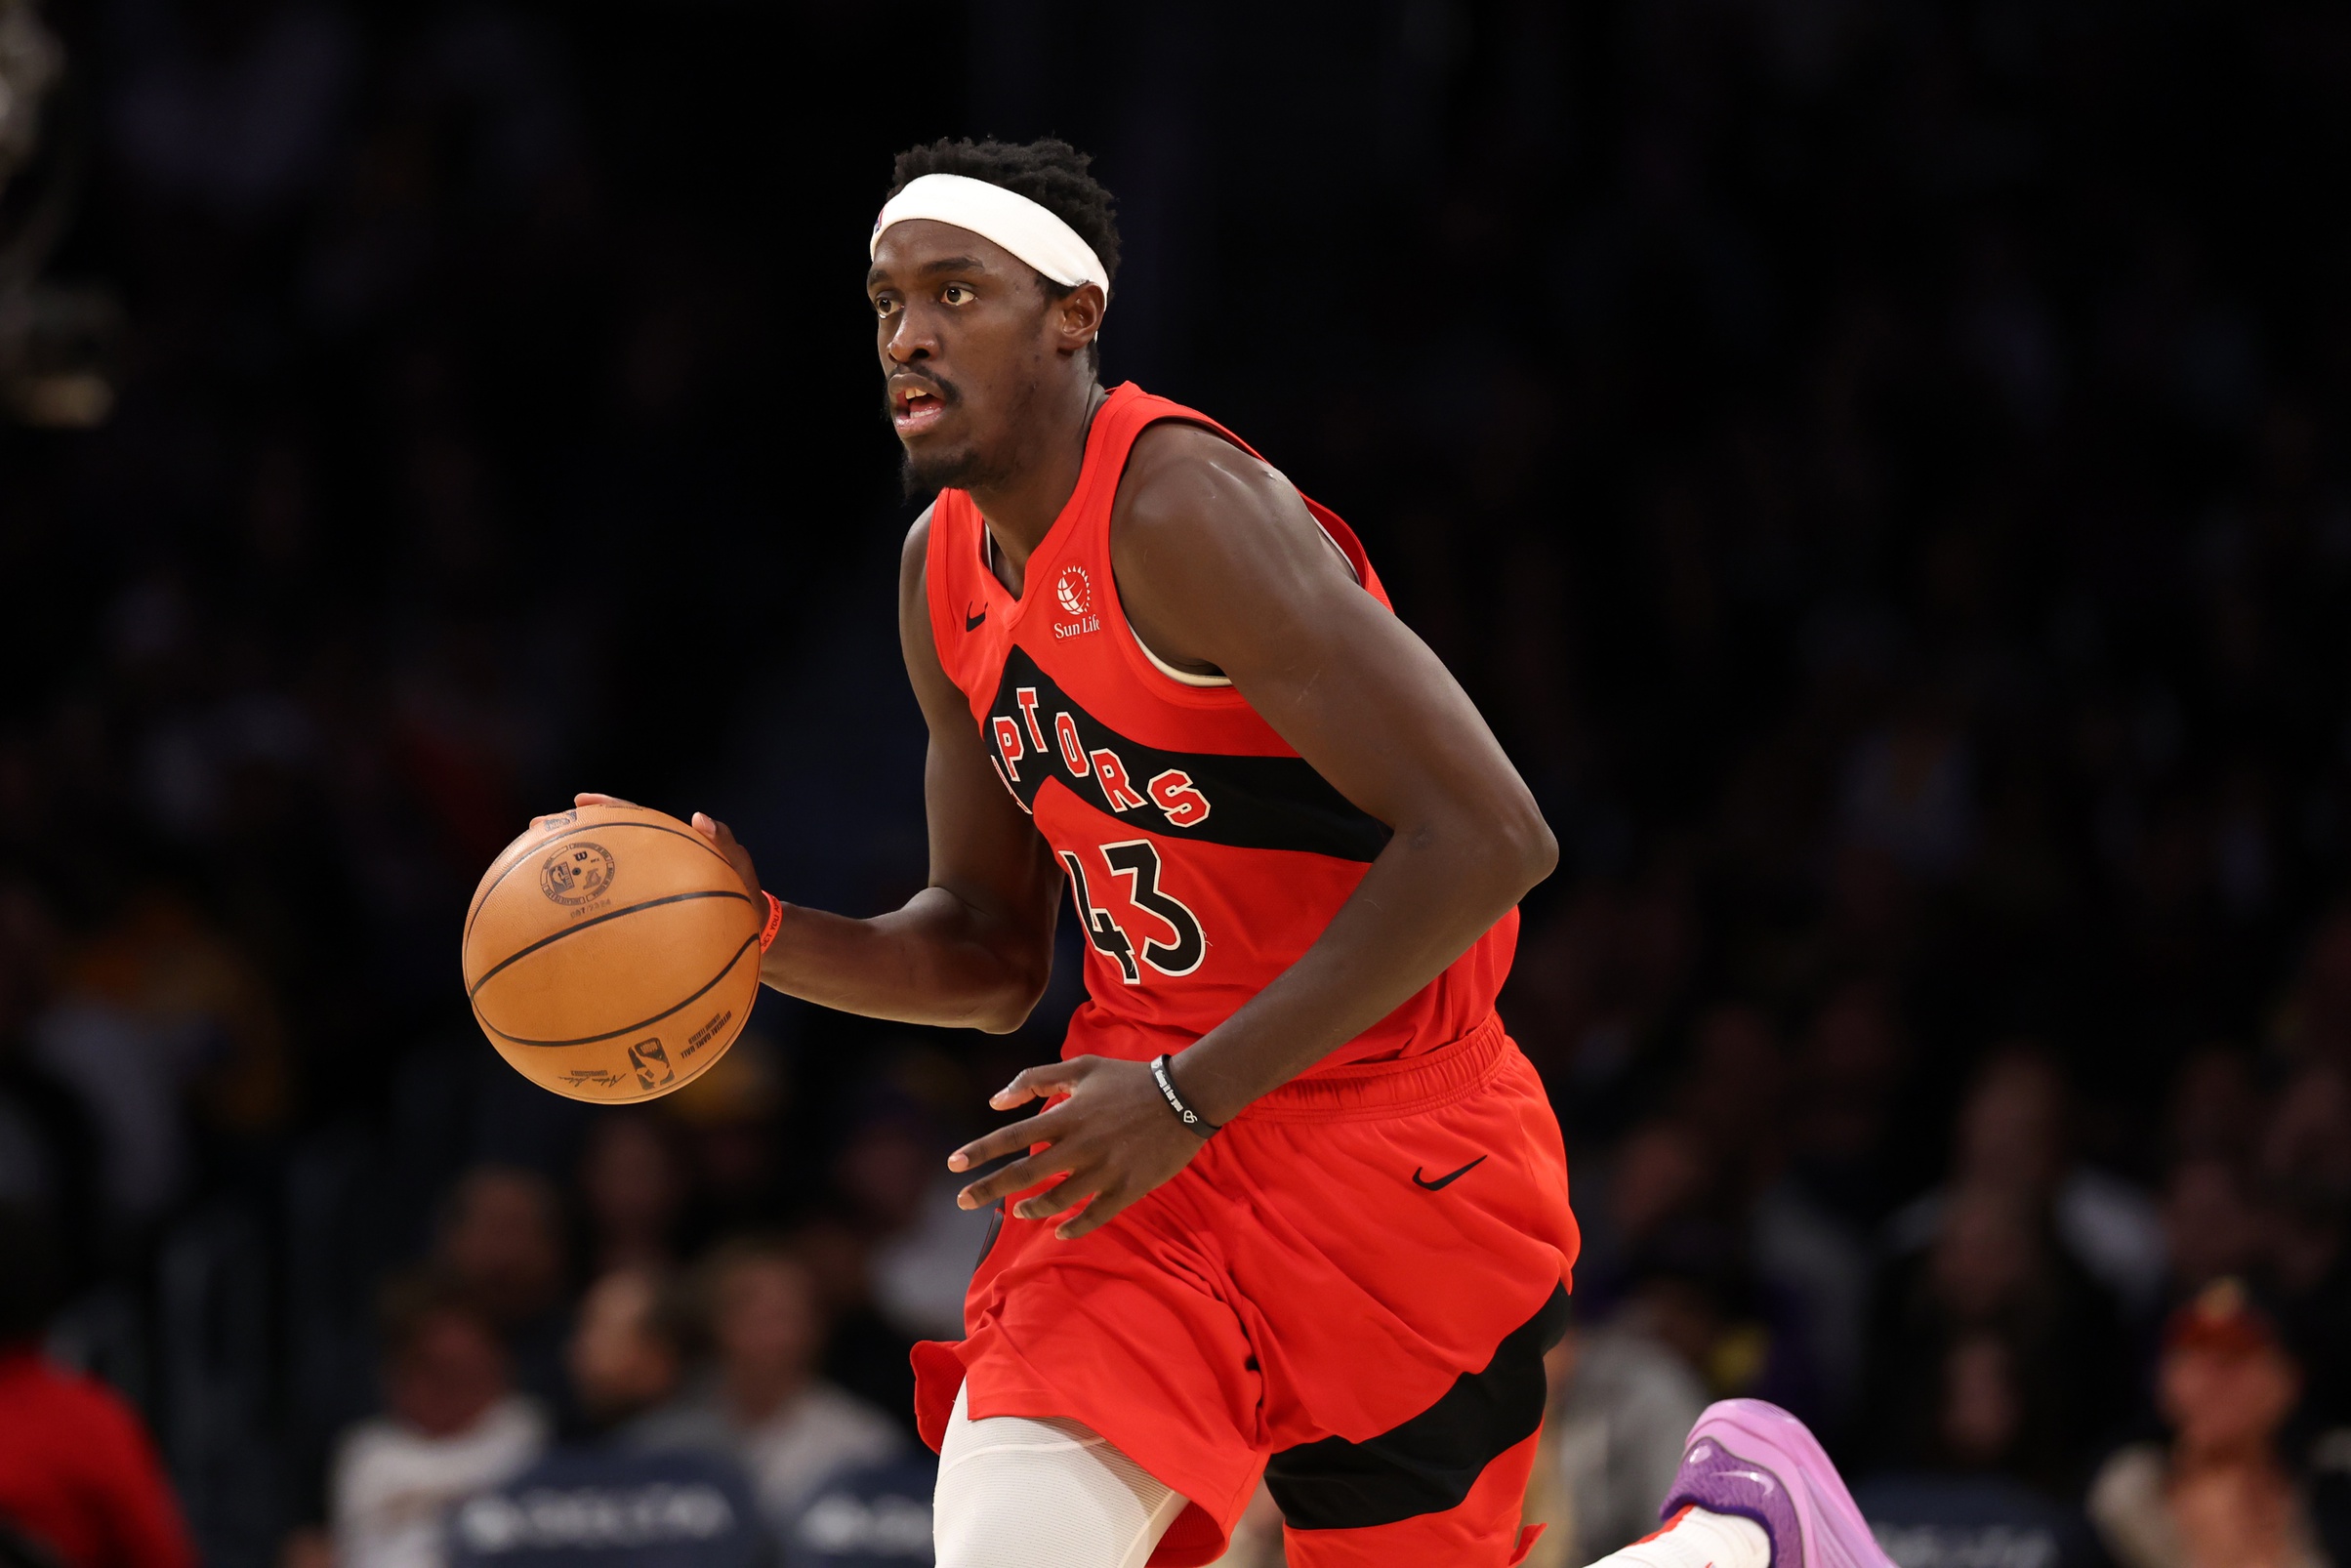 Toronto Raptors forward Pascal Siakam (43) dribbles the ball during the third quarter against the Los Angeles Lakers at Crypto.com Arena.